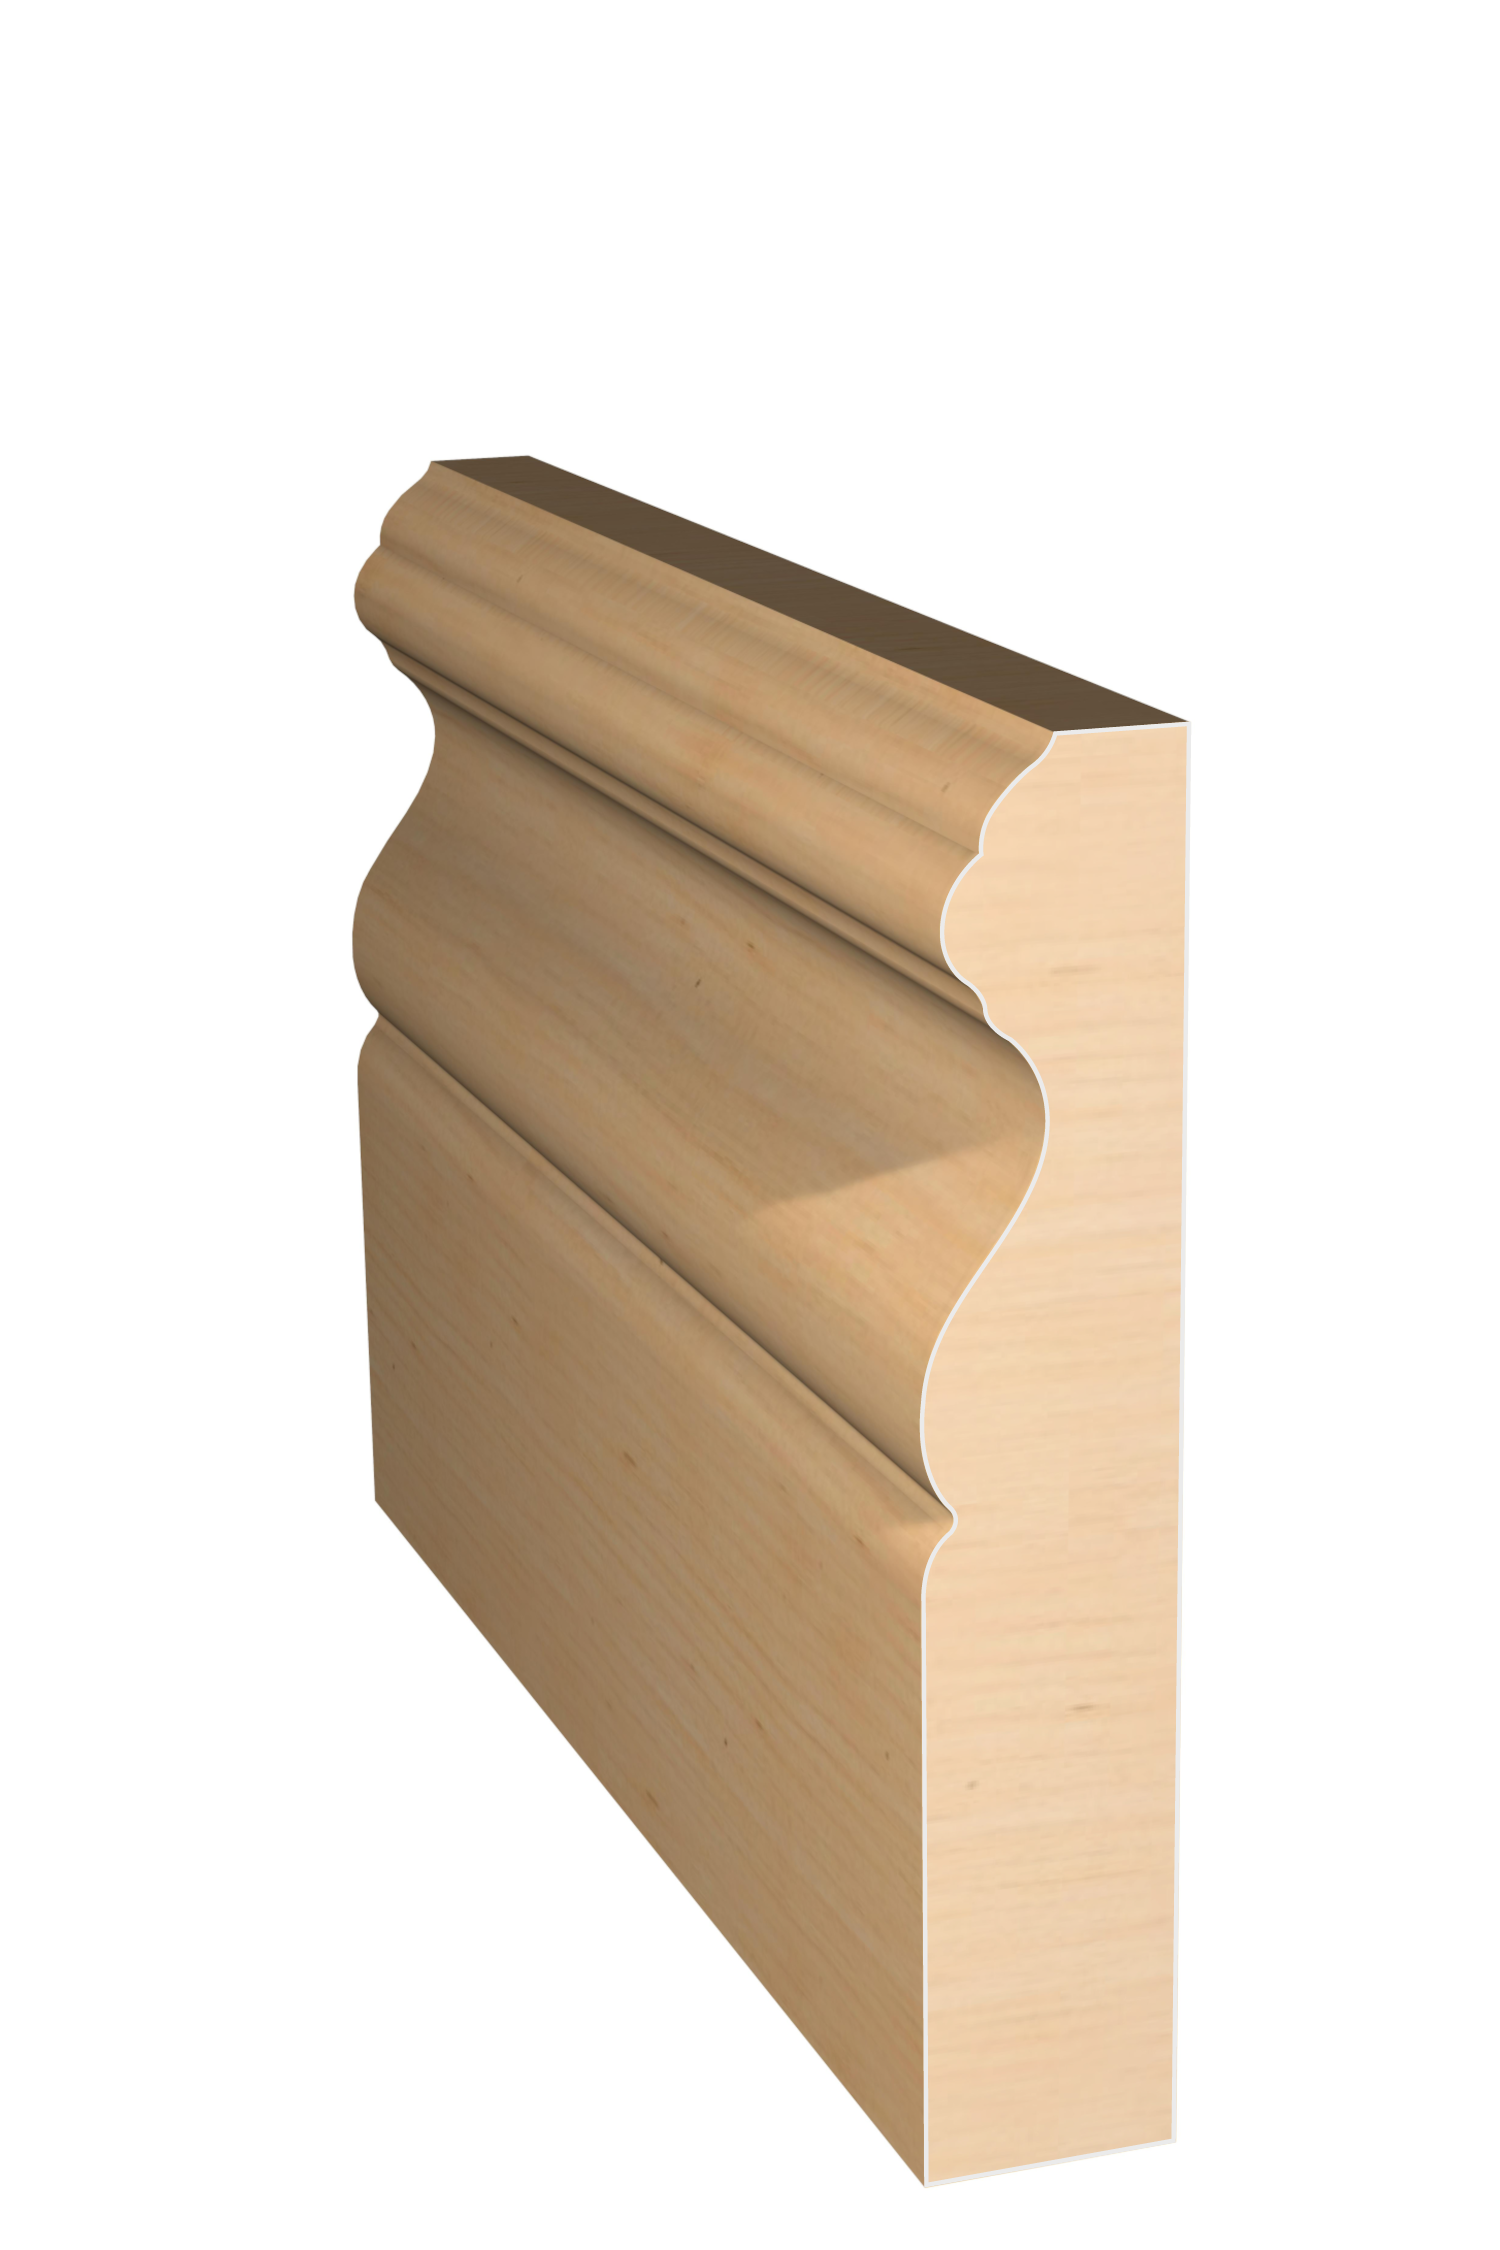 Three dimensional rendering of custom base wood molding BAPL49 made by Public Lumber Company in Detroit.